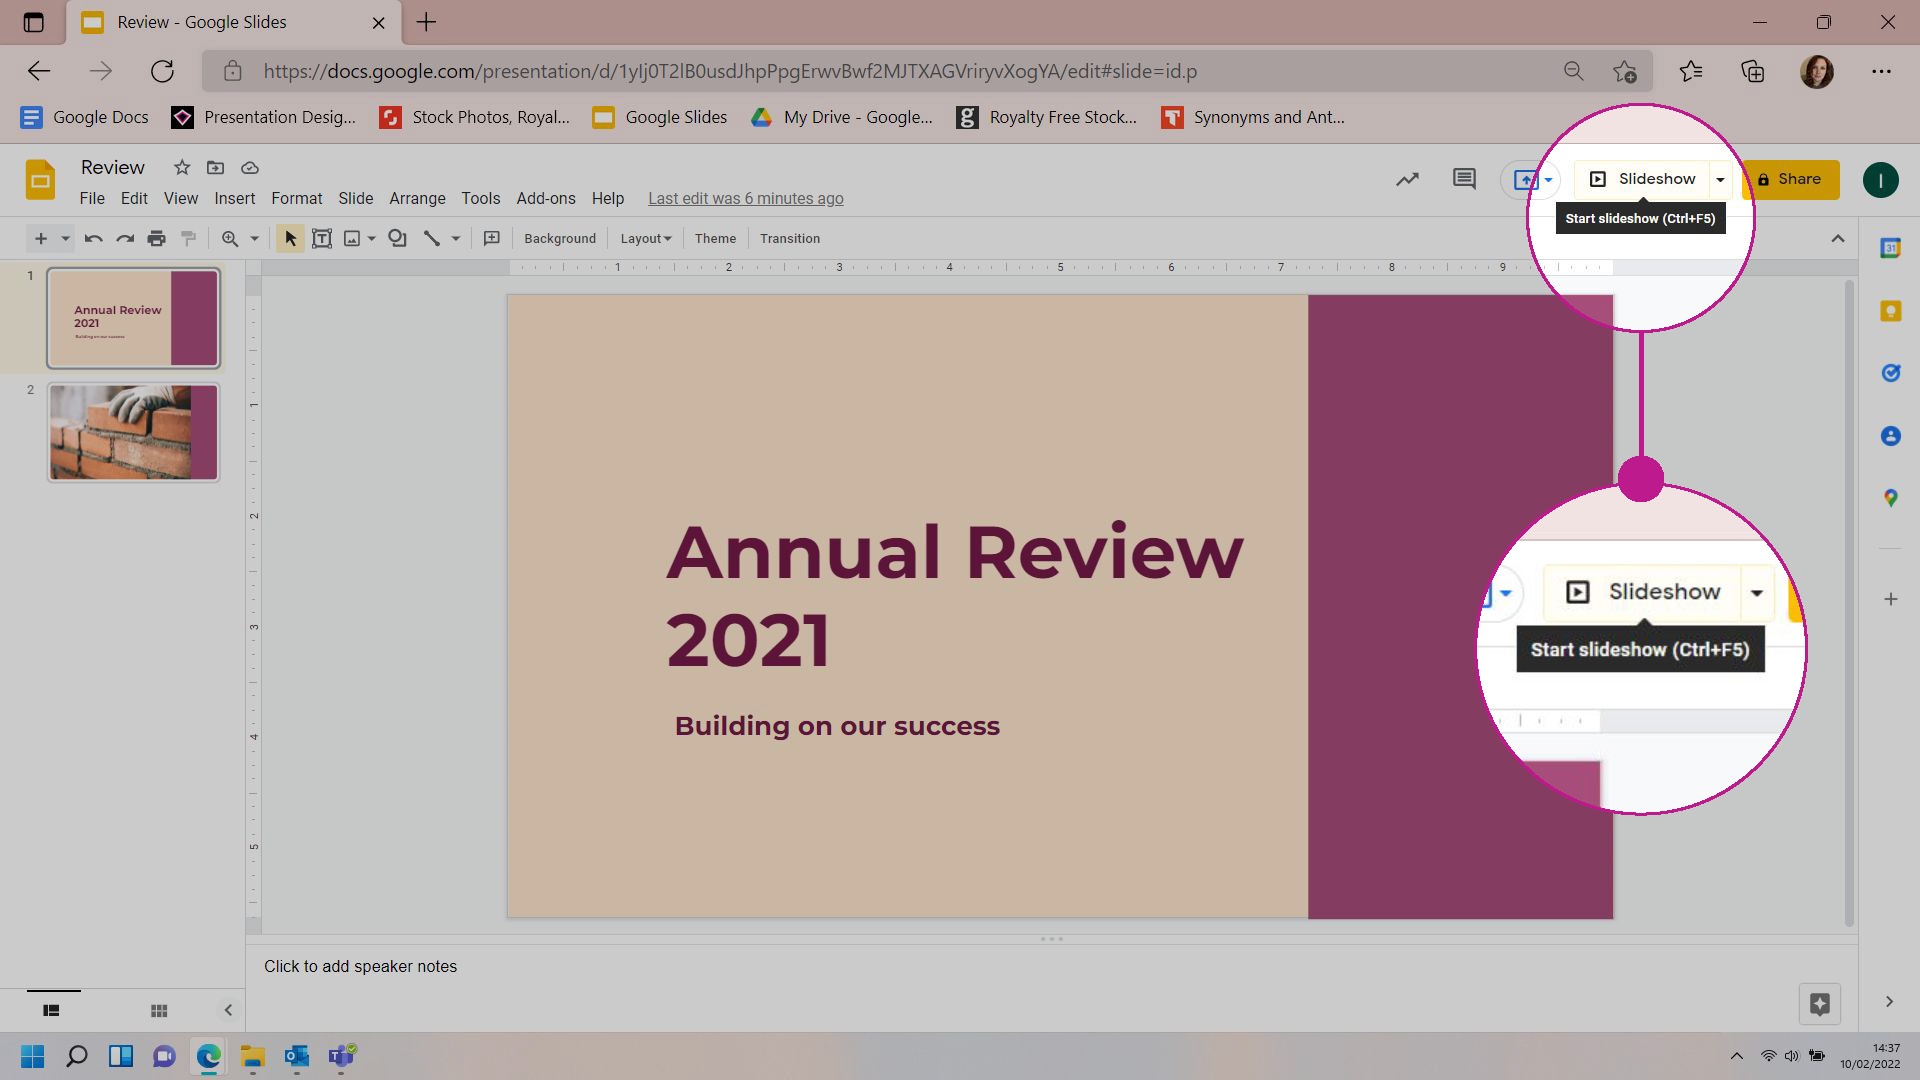 Google Slides screenshot with the Slideshow button highlighted. 